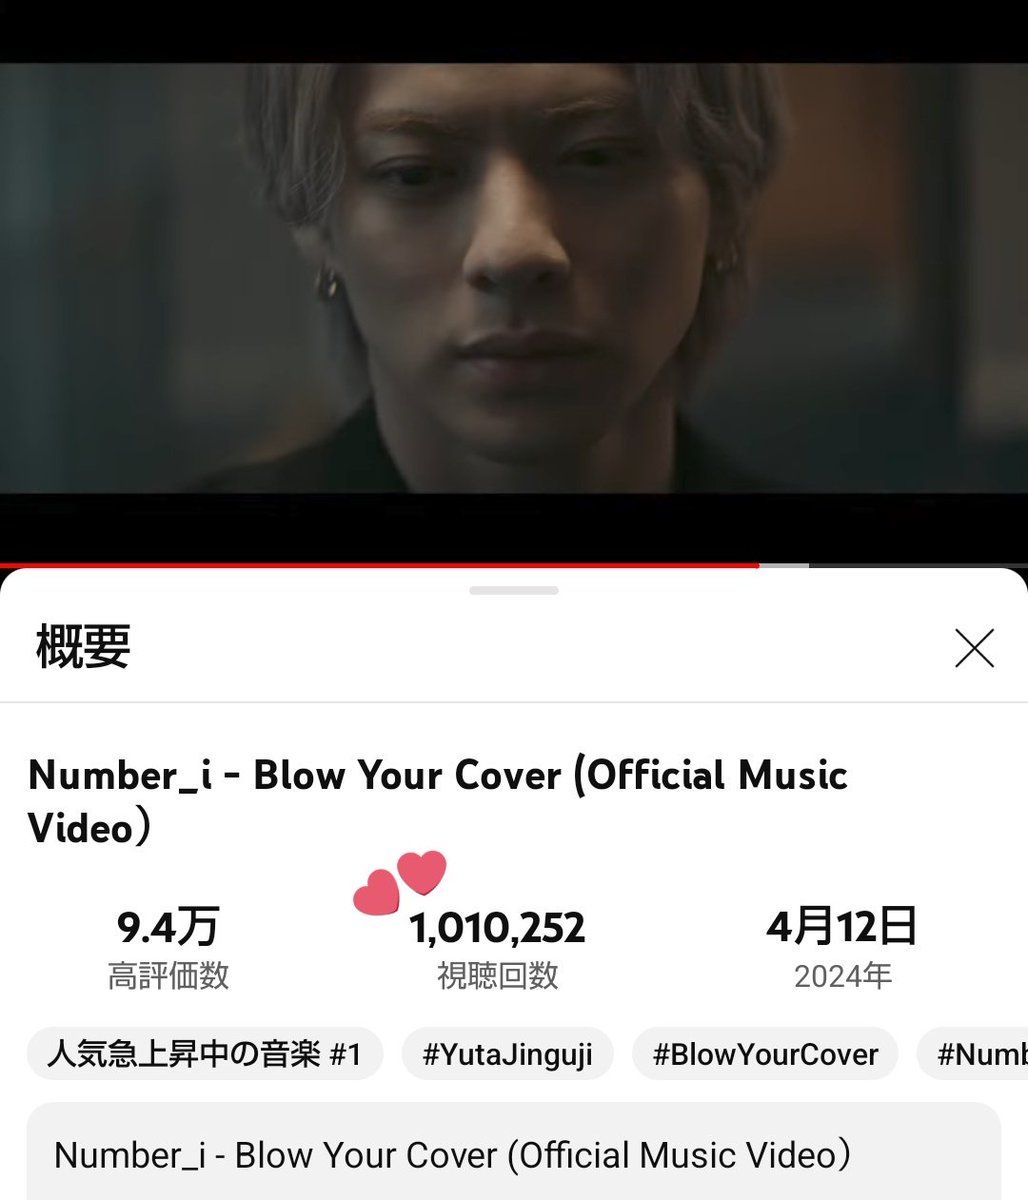 🕺Blow Your Cover 100万回再生おめでとう🕺 出発に間に合ったかな🍀 #Number_i #Number_i_BlowYourCover youtu.be/zJUFz2QxxkU?si…